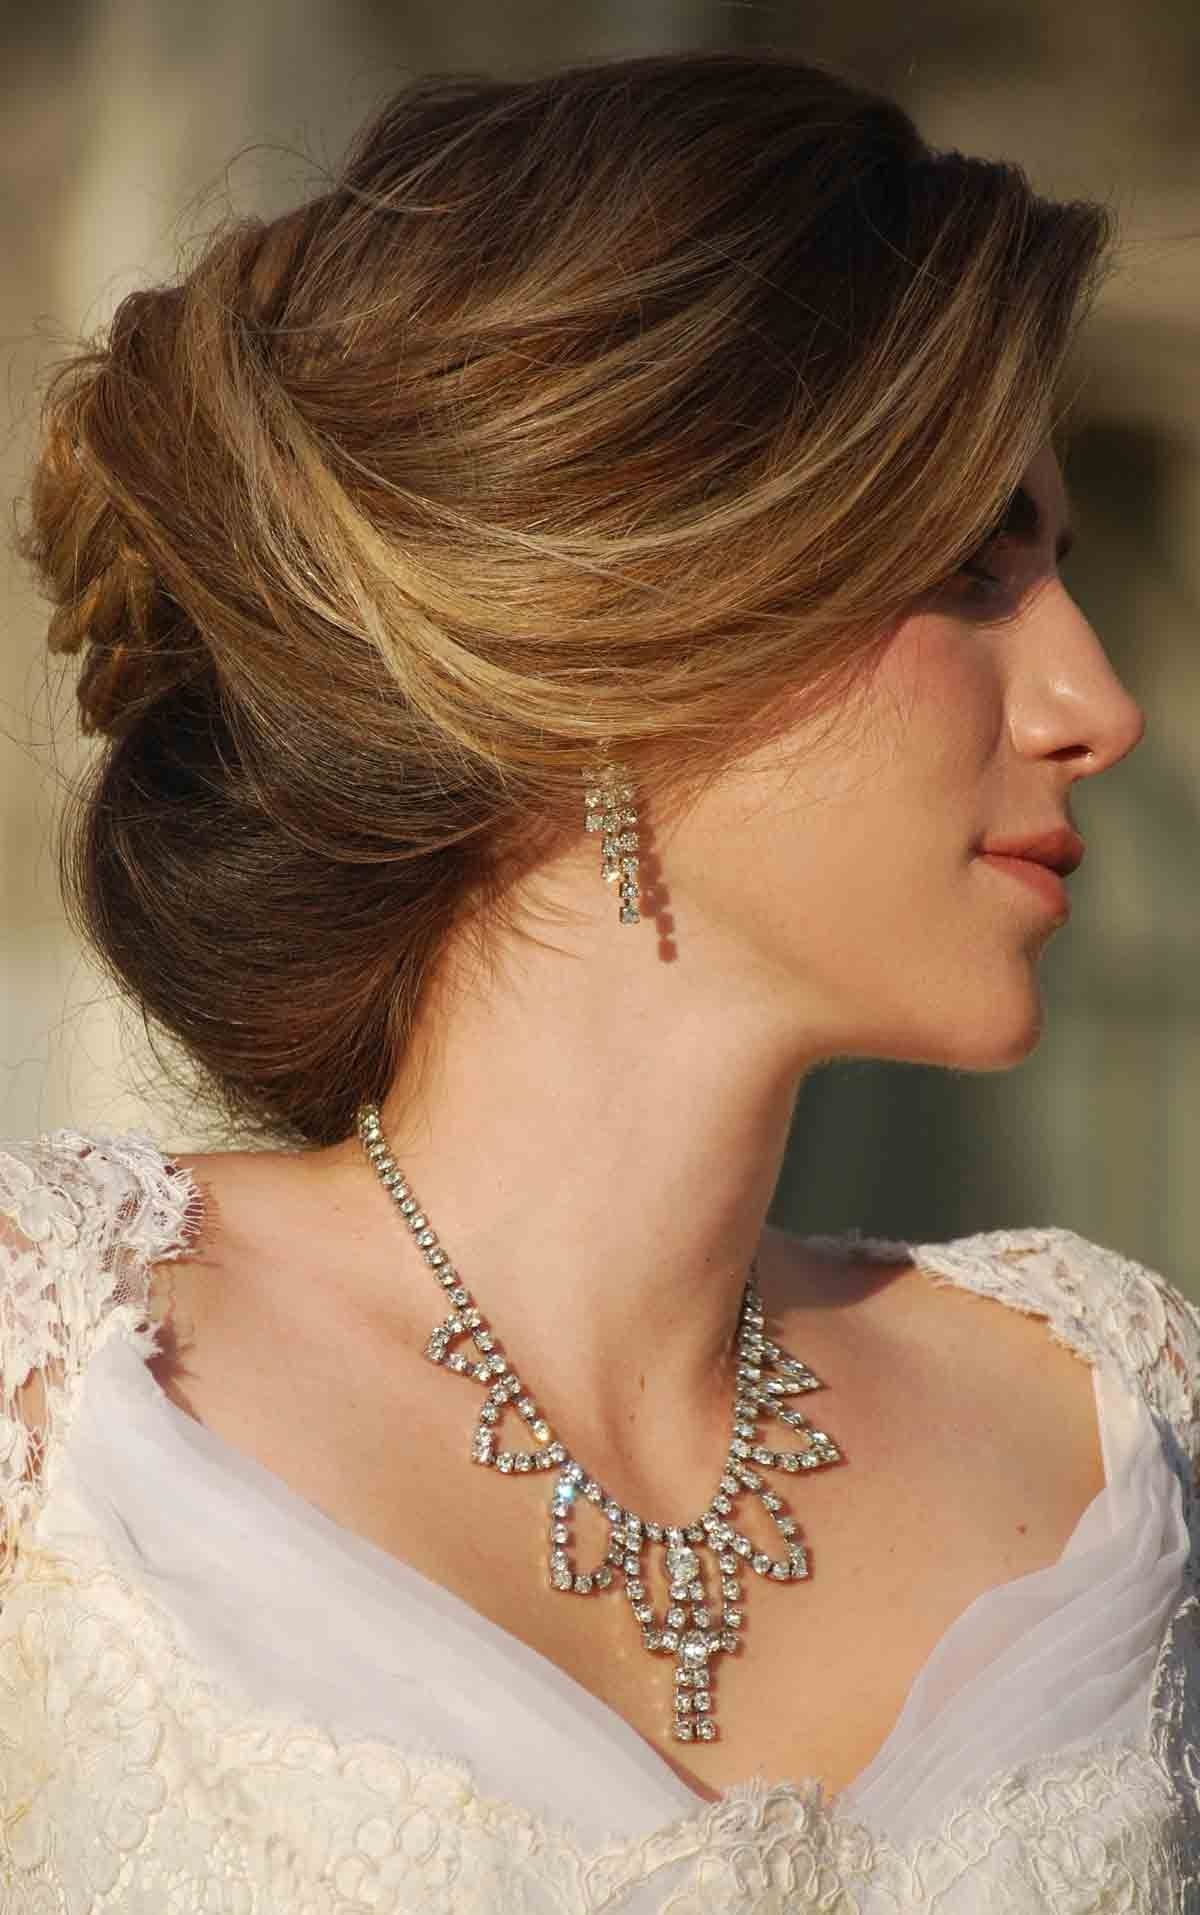 Useful Hairstyles For The Bride About Hair Styles For Mother Of The Regarding Popular Wedding Hairstyles For Long Hair And Oval Face (View 7 of 15)